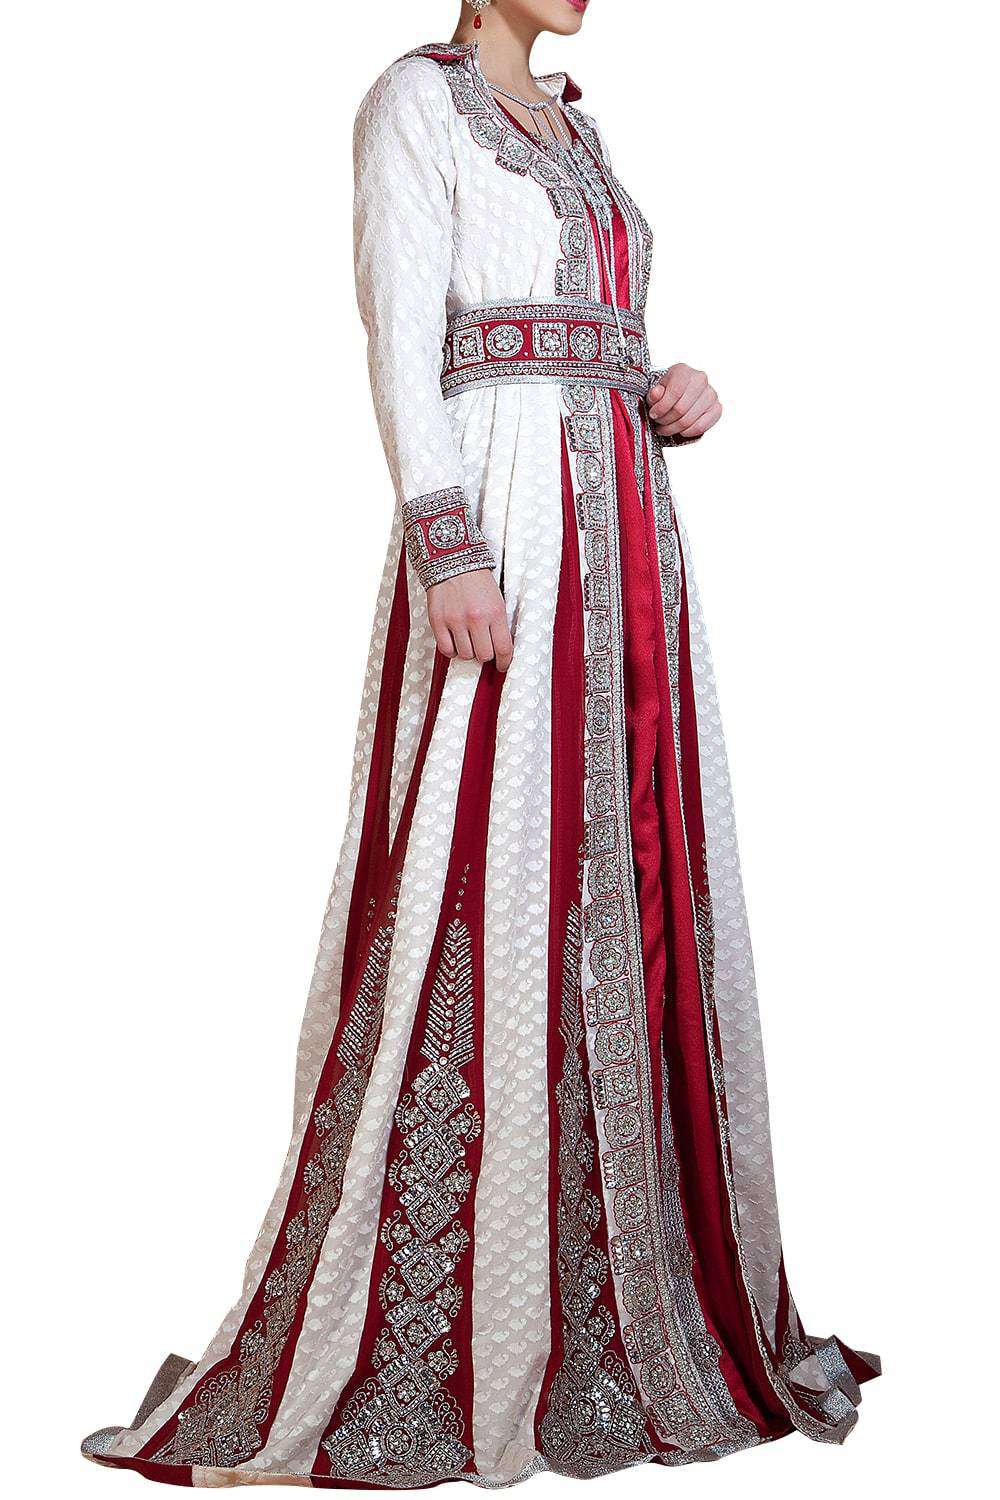 Off White and Maroon Color Embroidered Long Sleeve Wedding Dress Takchita